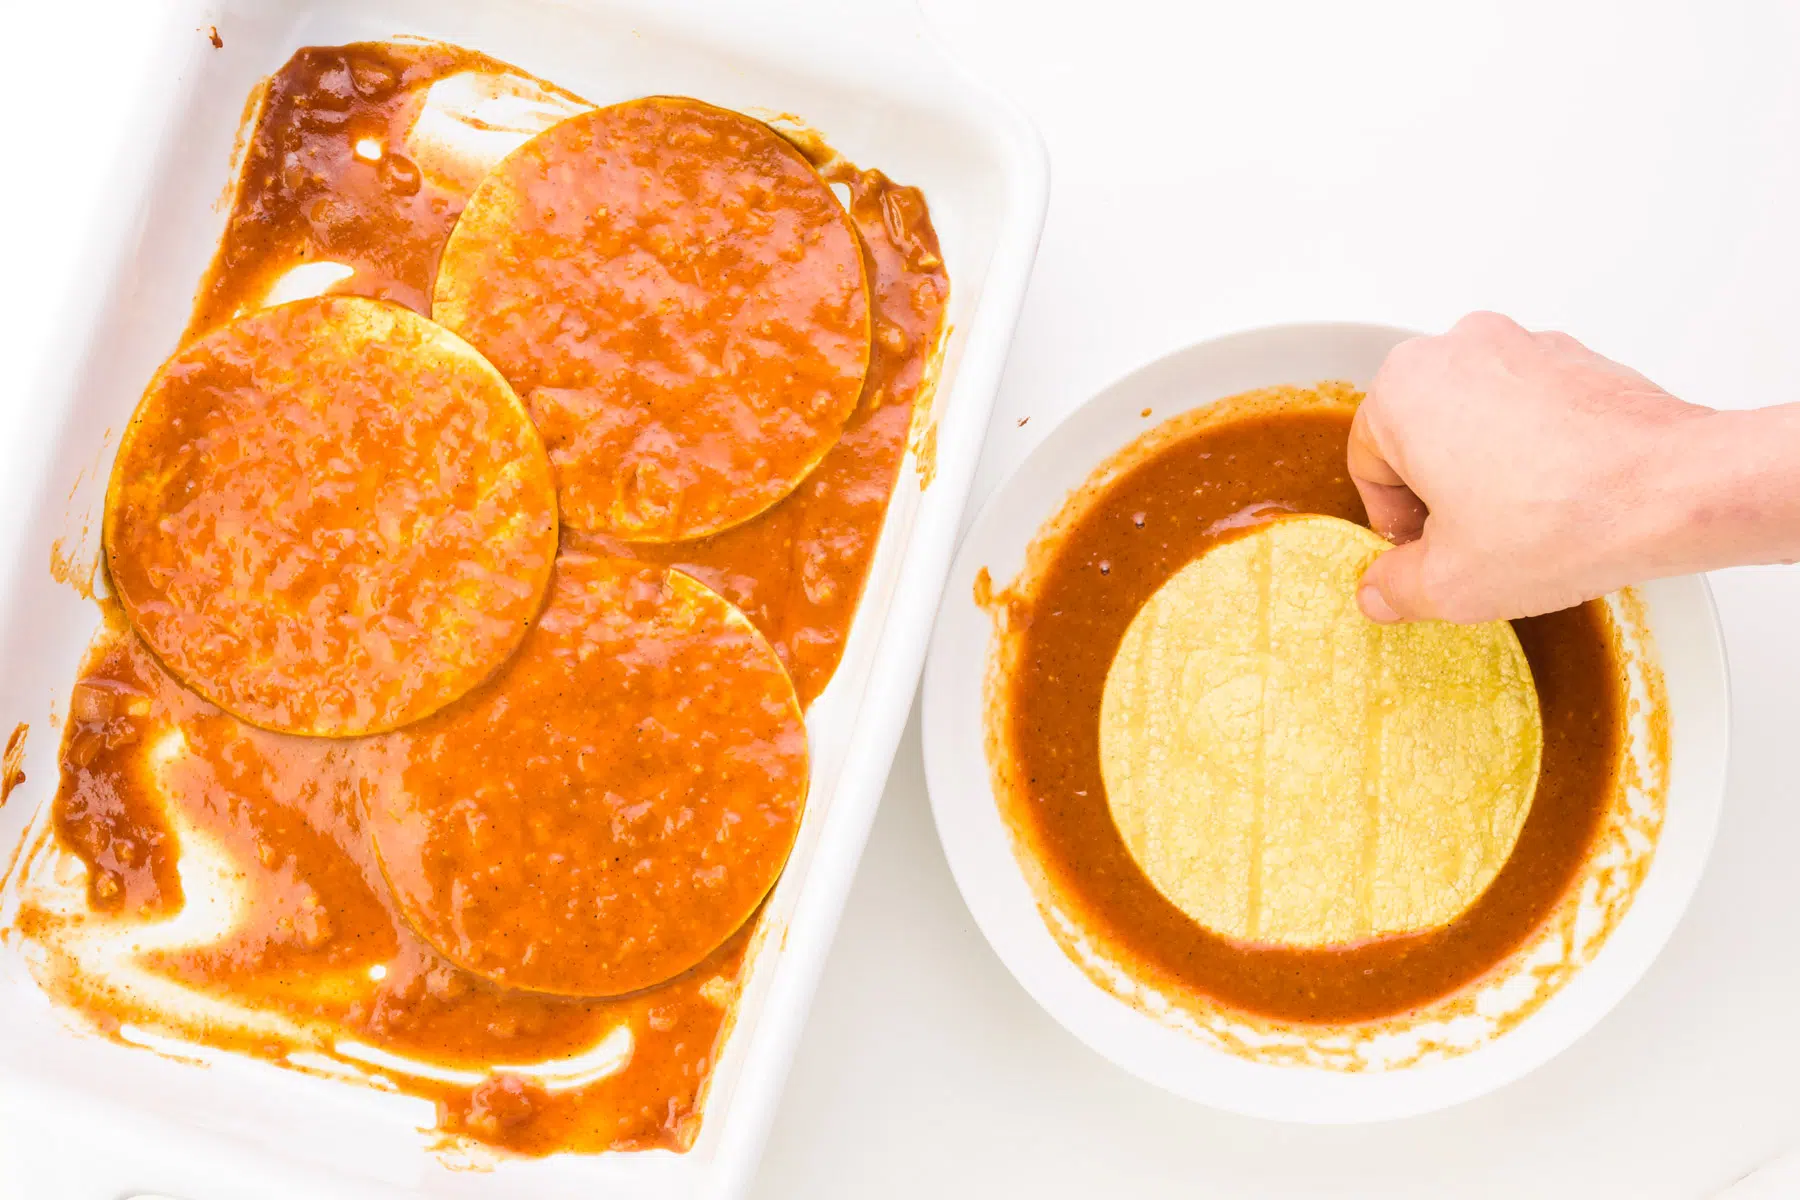 A hand is dipping tortillas in enchilada sauce and arranging them in a casserole dish.